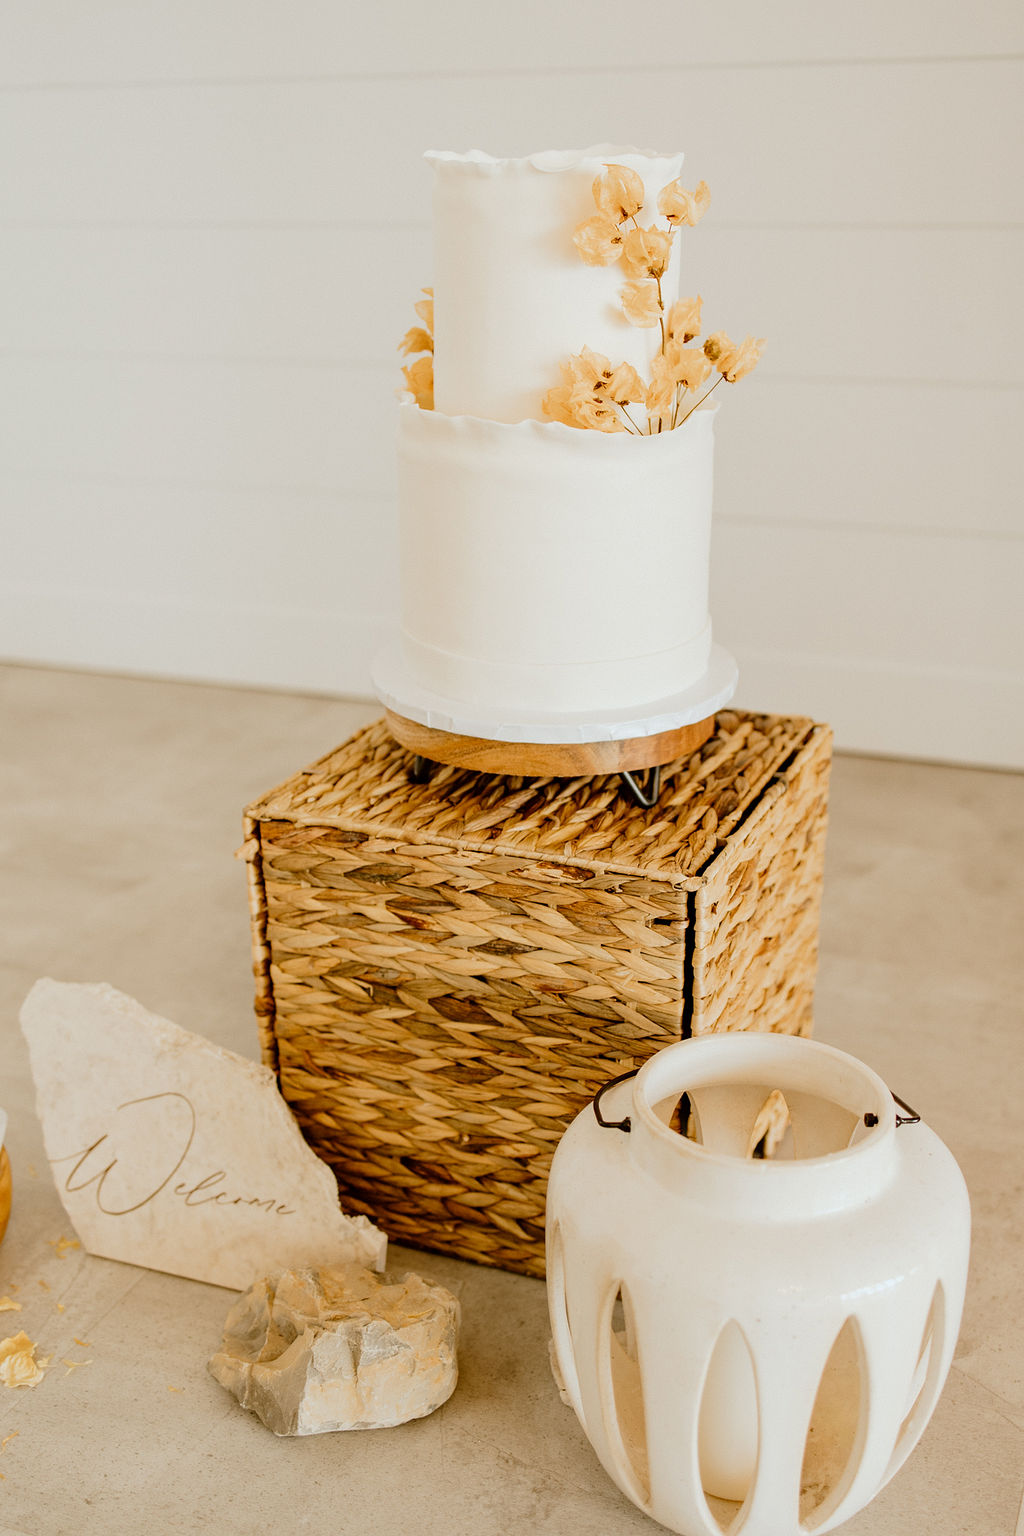 Two tiered ruffled wedding cake with dried florals